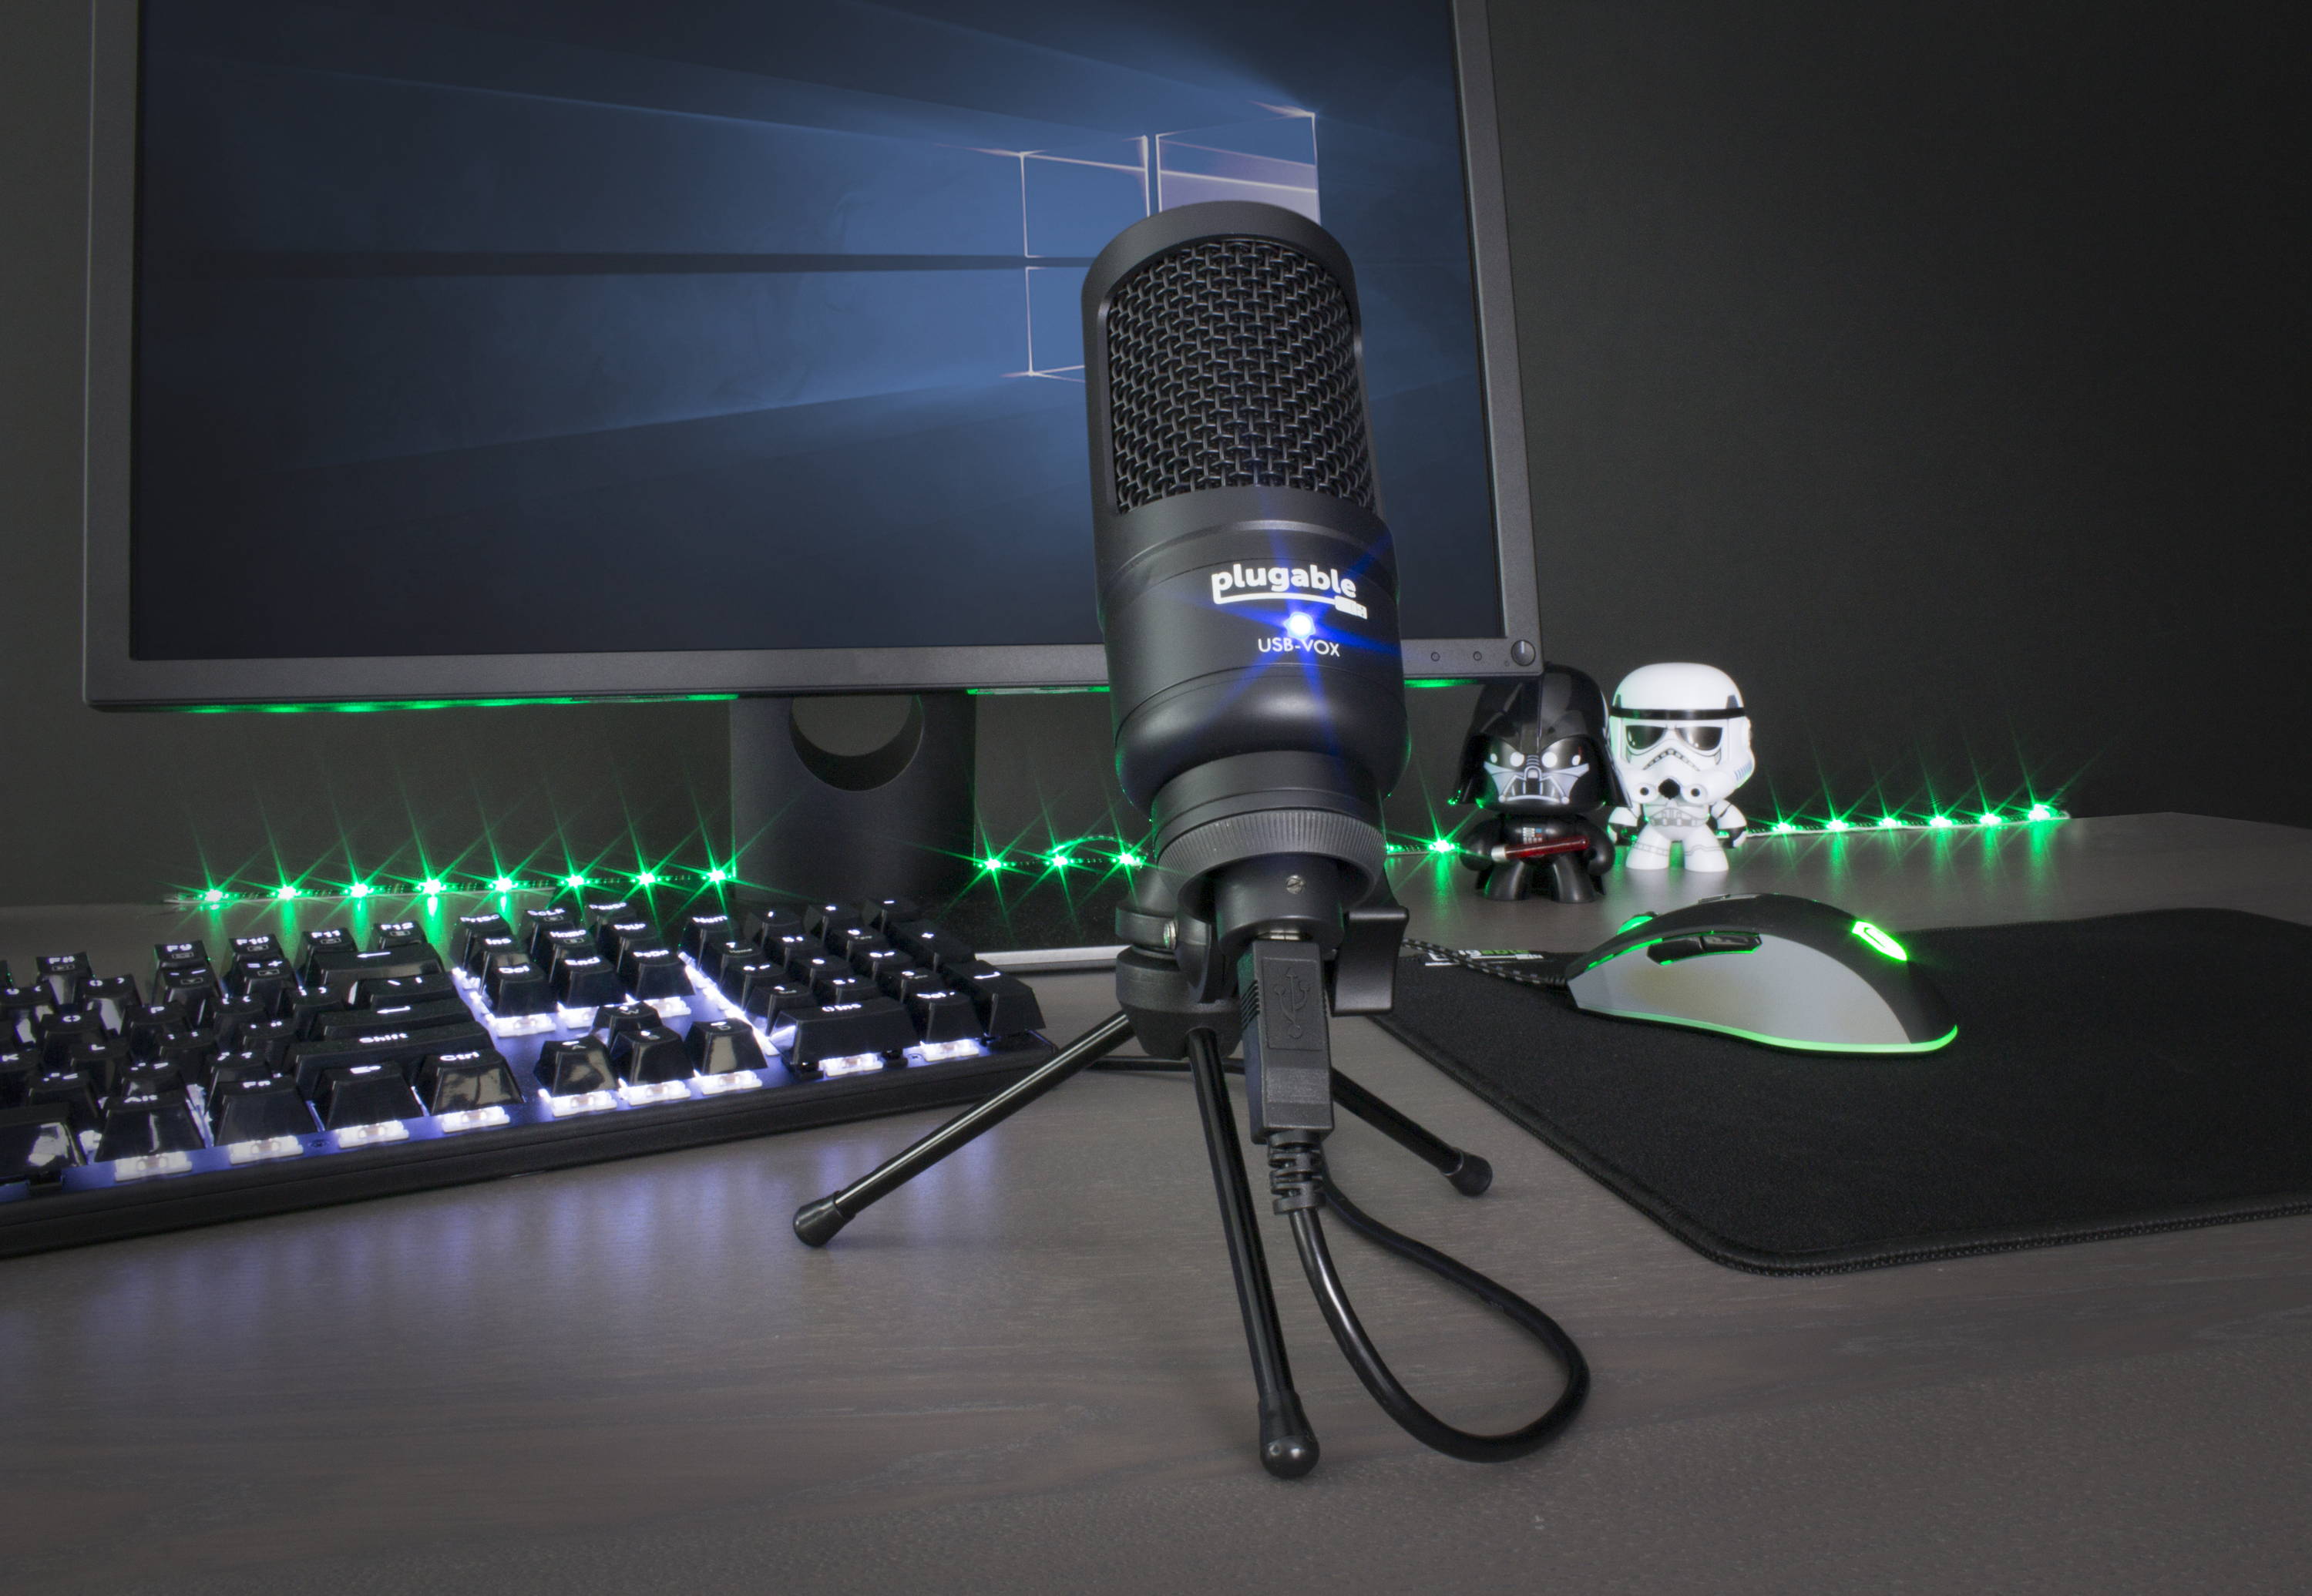 Plugable’s New USB Studio Microphone: Professional Sound Quality, Great Value